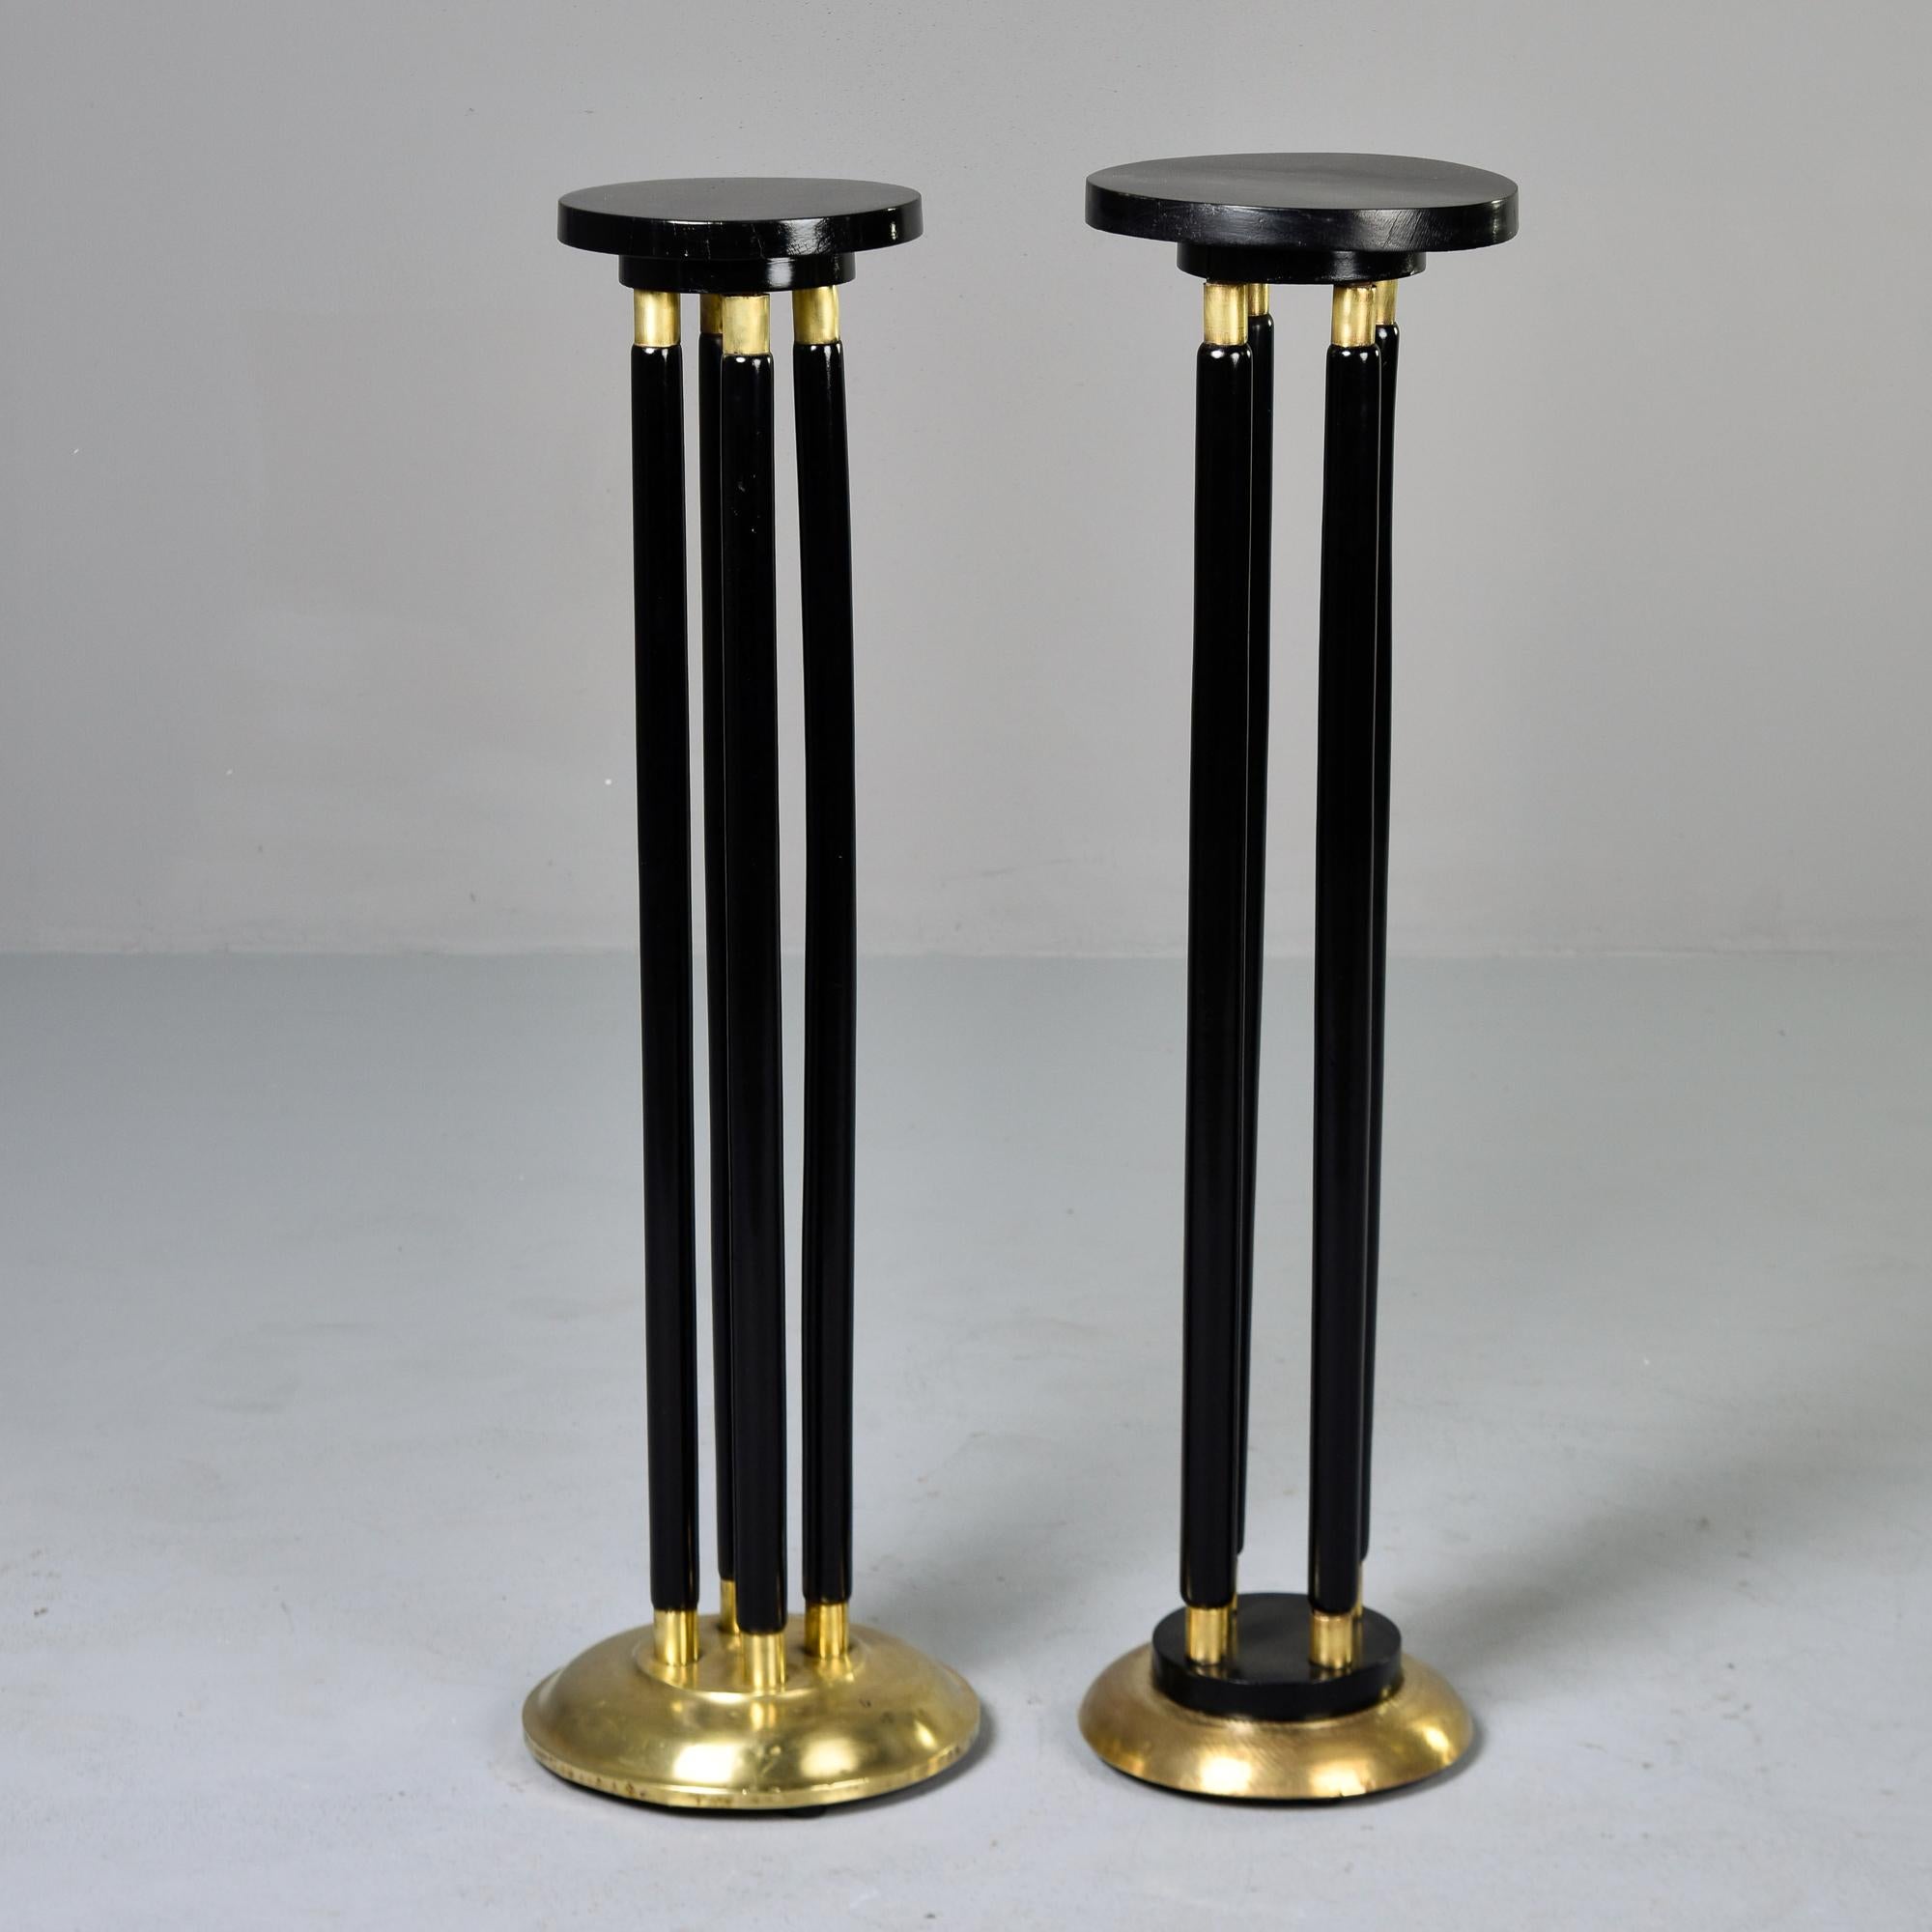 Found in Italy, these circa 1930s tall slender stands feature an ebonised finish and brass trim. Tops are round - larger top is 9.75” diameter. Near pair - there are slight size differences and the trim work on the bases does not match. Unknown